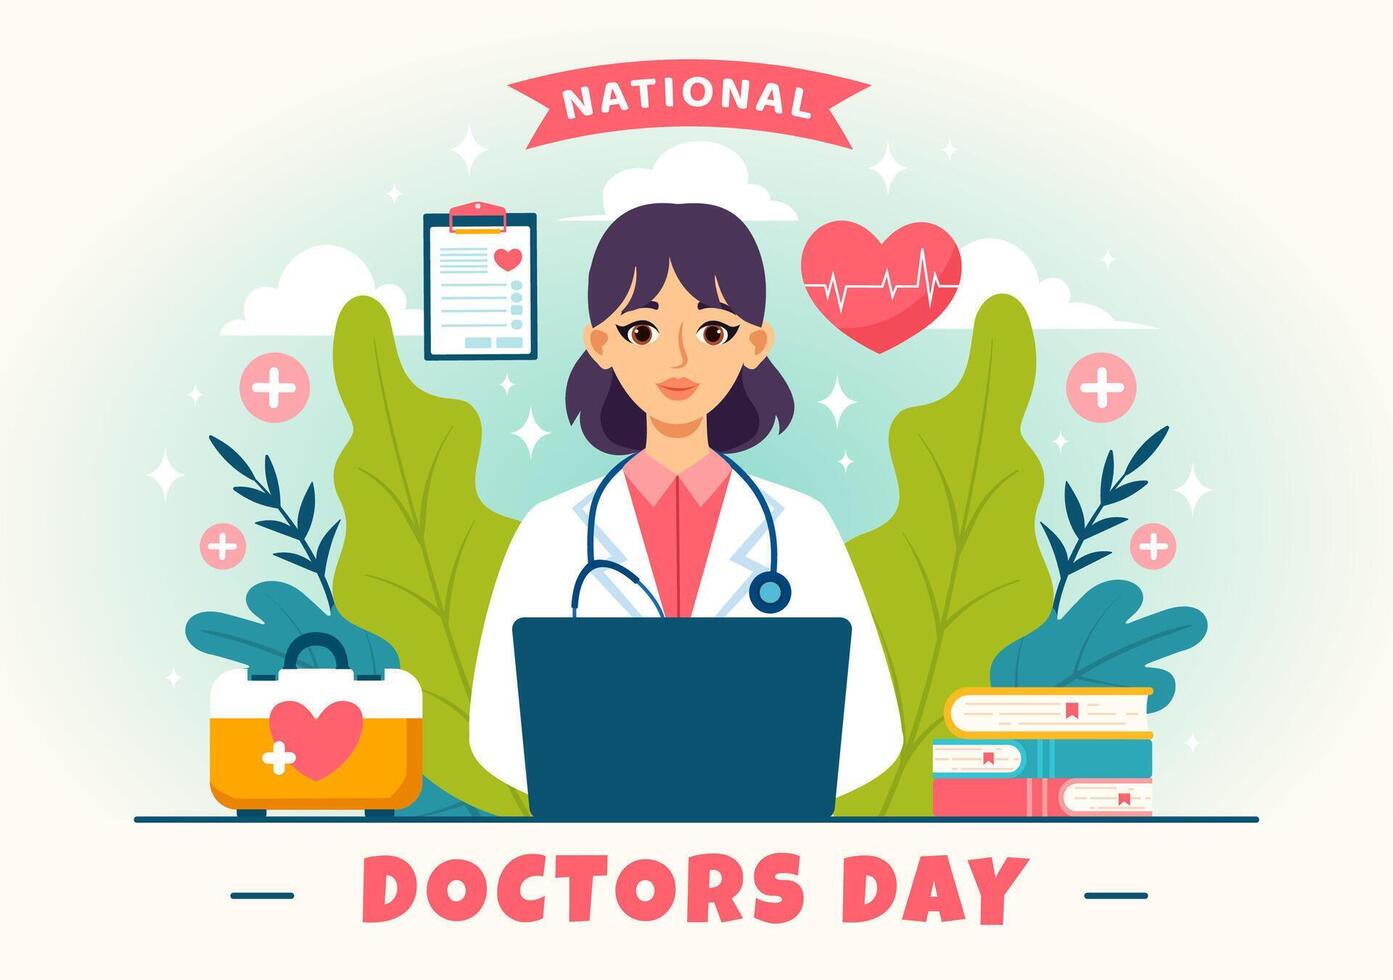 National Doctors Day Illustration with Doctor, Stethoscope and Medical Equipment for Dedication and Contributions in Flat Cartoon Background vector